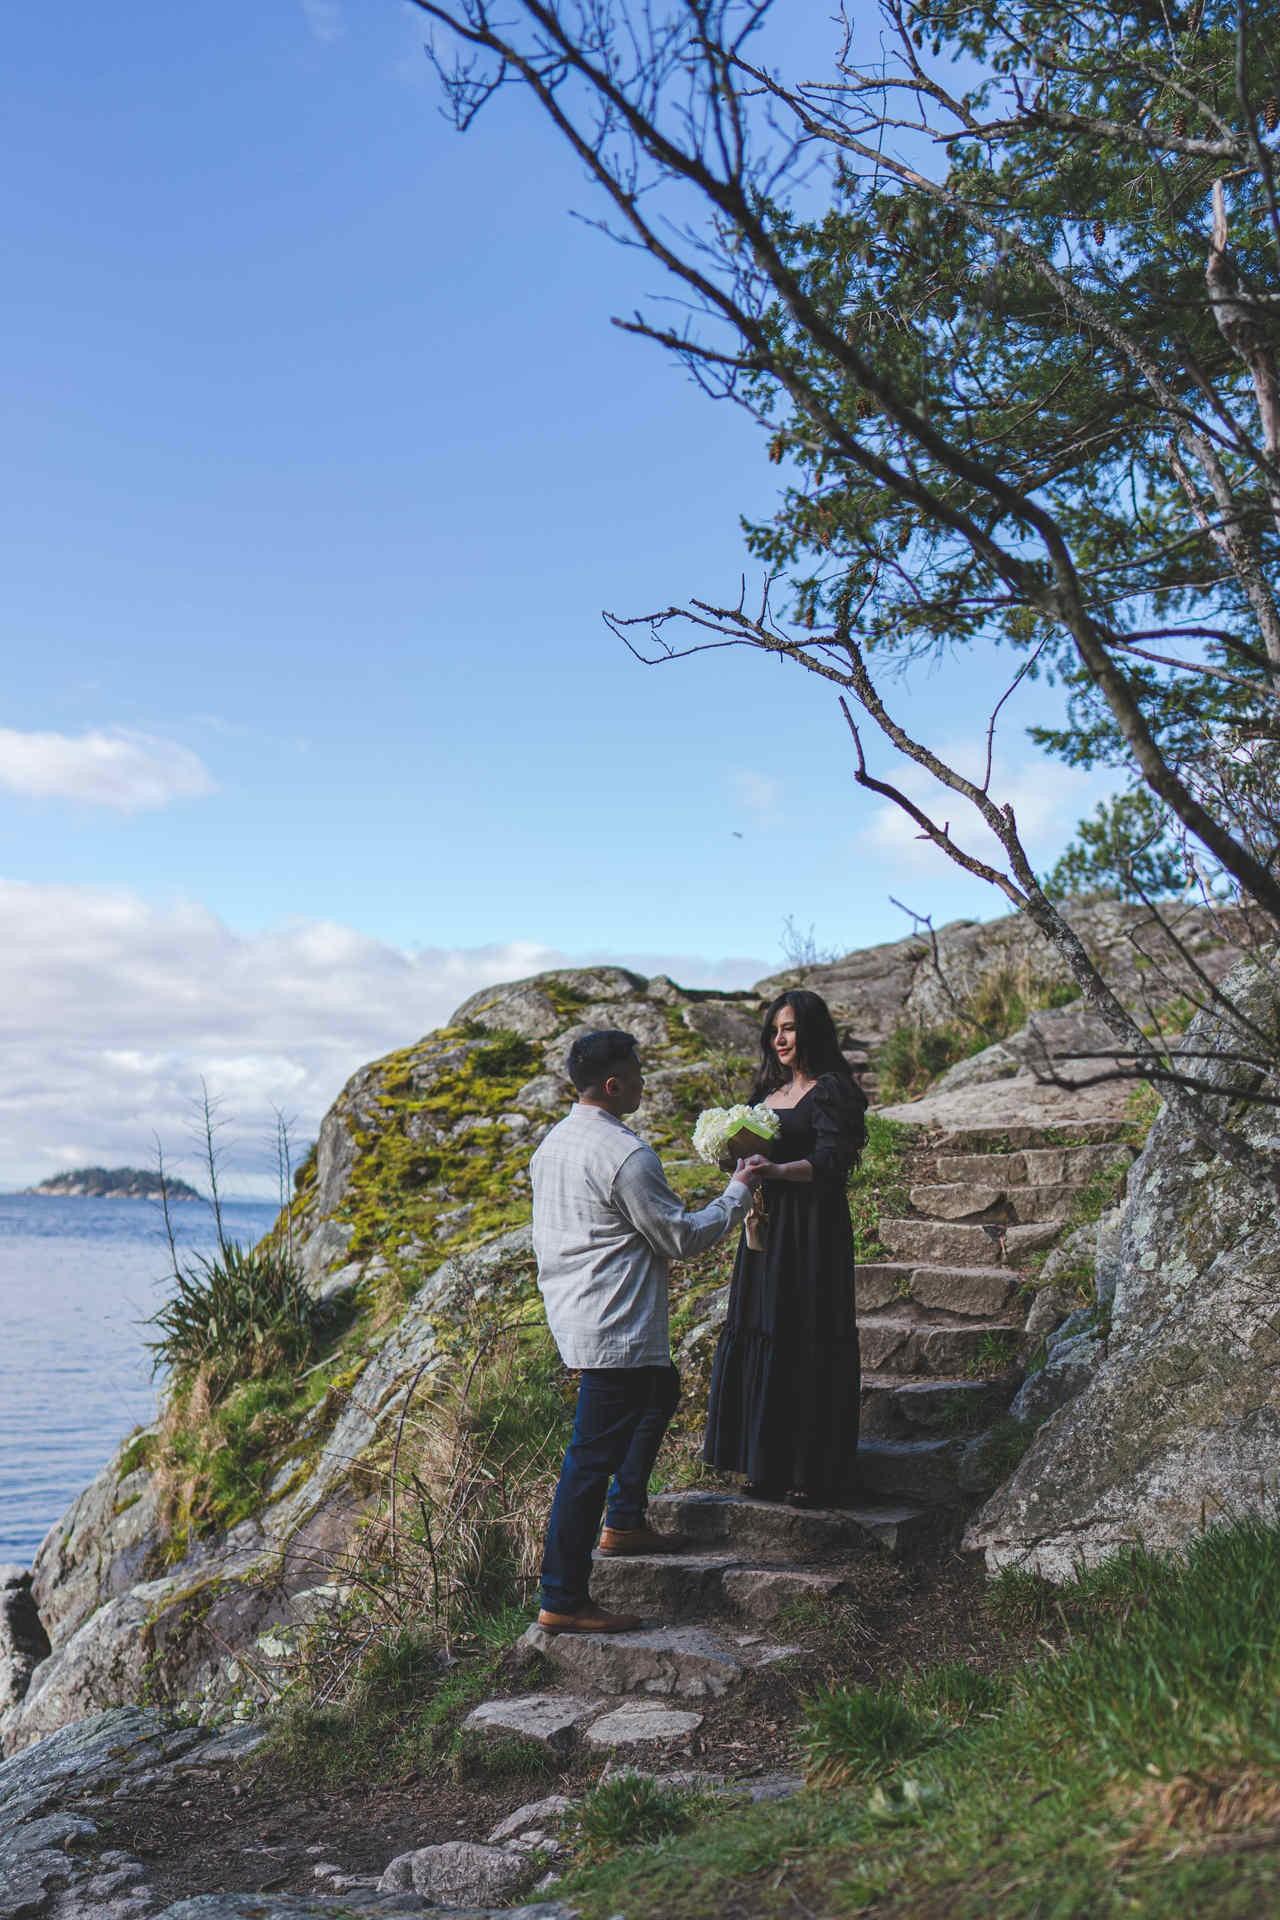 North Vancouver Engagement Photoshoot at Whytecliff Park with Rose & Hoang